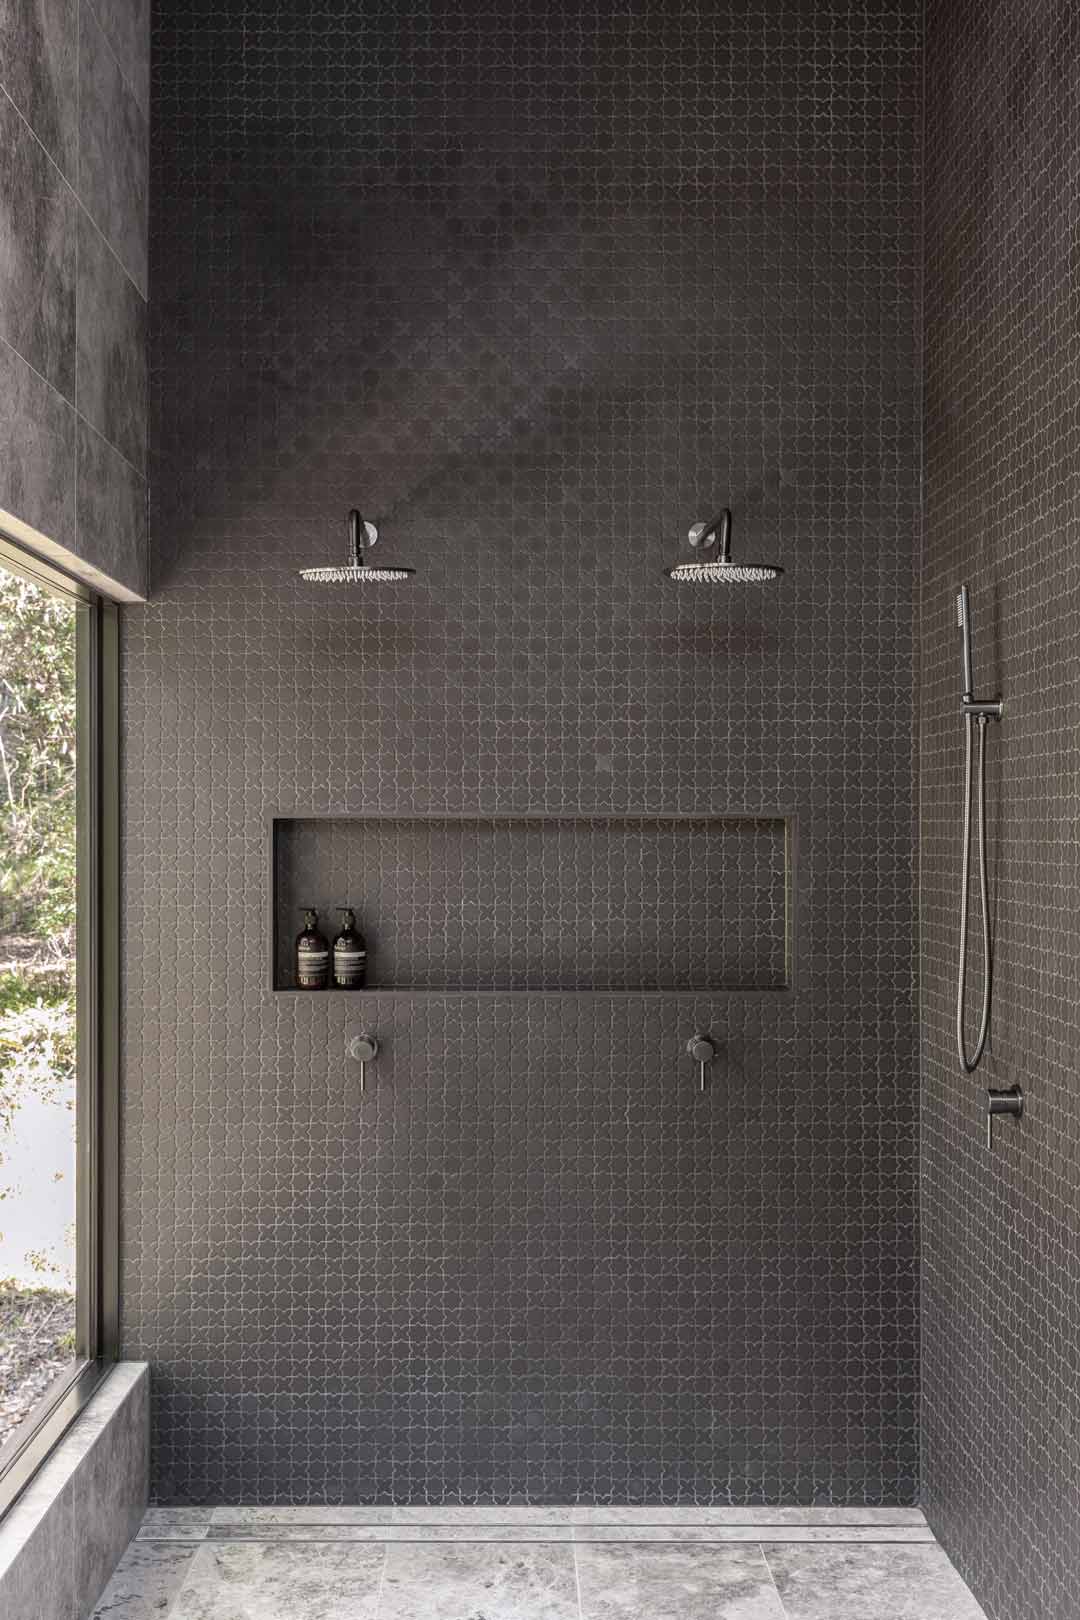 A double shower with brushed gunmetal tapware and a large window so you feel like you are showering in nature